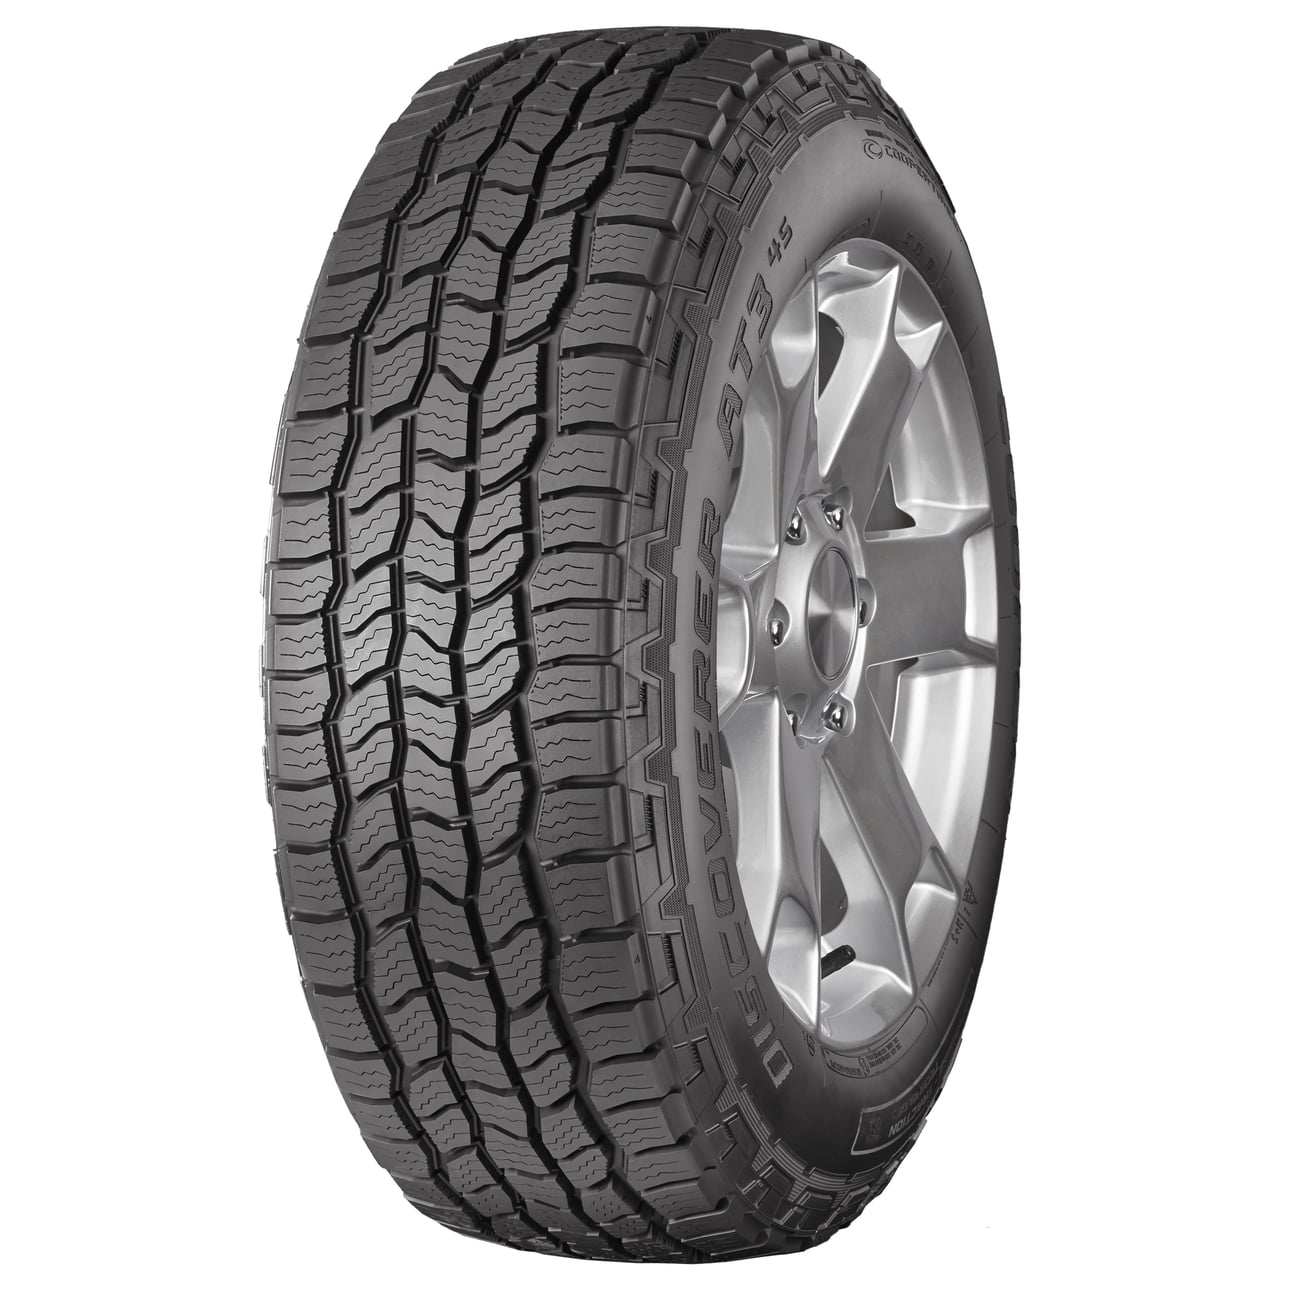 Cooper Discoverer AT3 4S All-Season 265/65R17 112T Tire